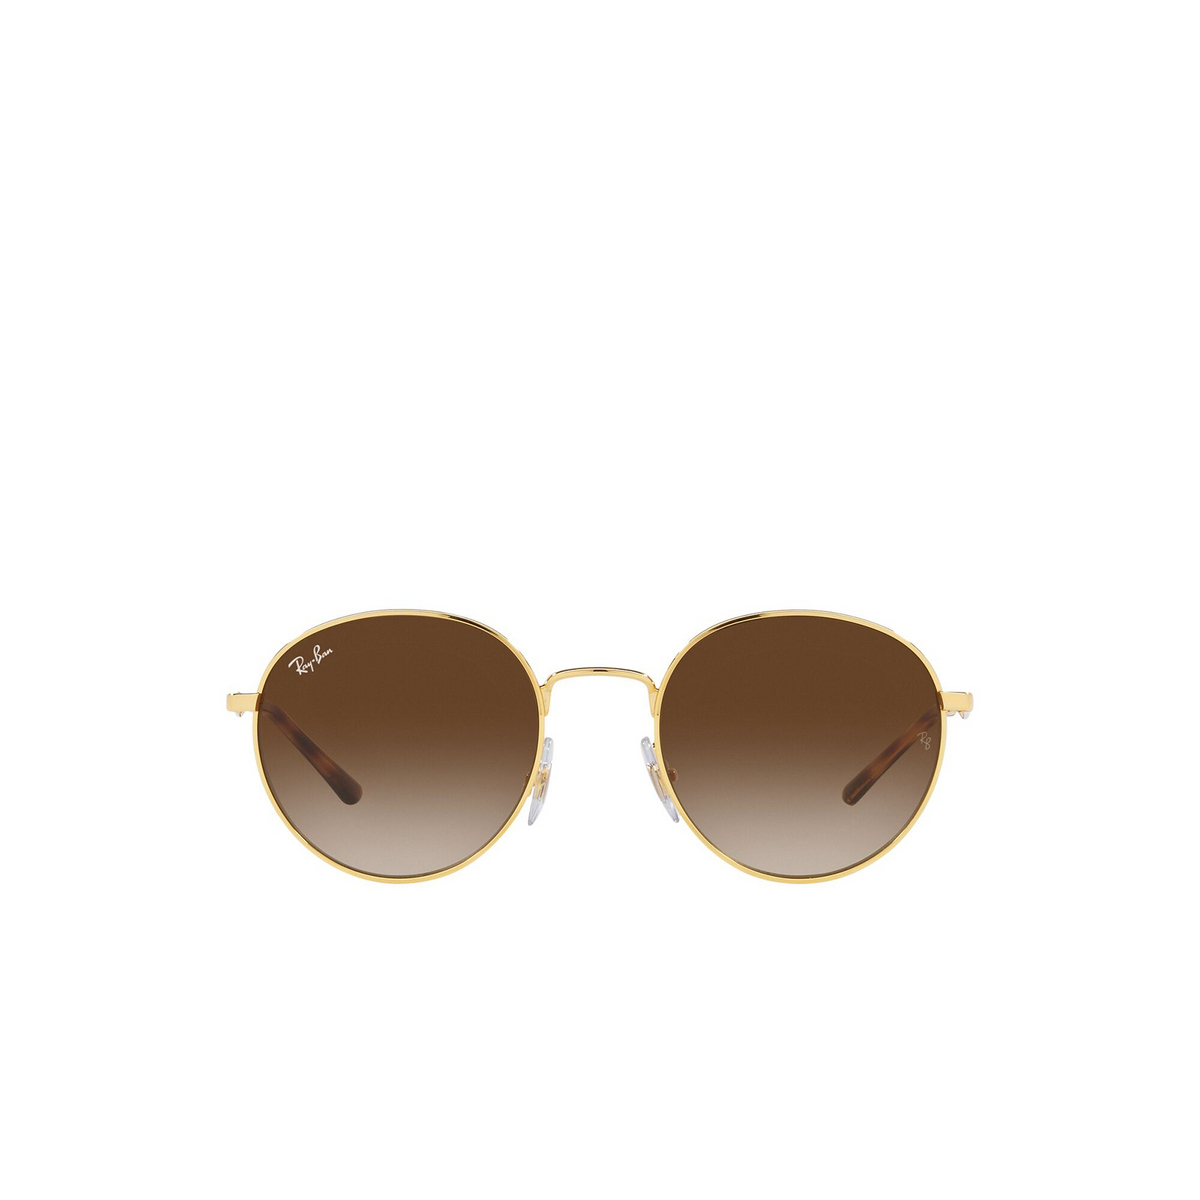 Ray-Ban® Round Sunglasses: RB3681 color Arista 001/13 - front view.